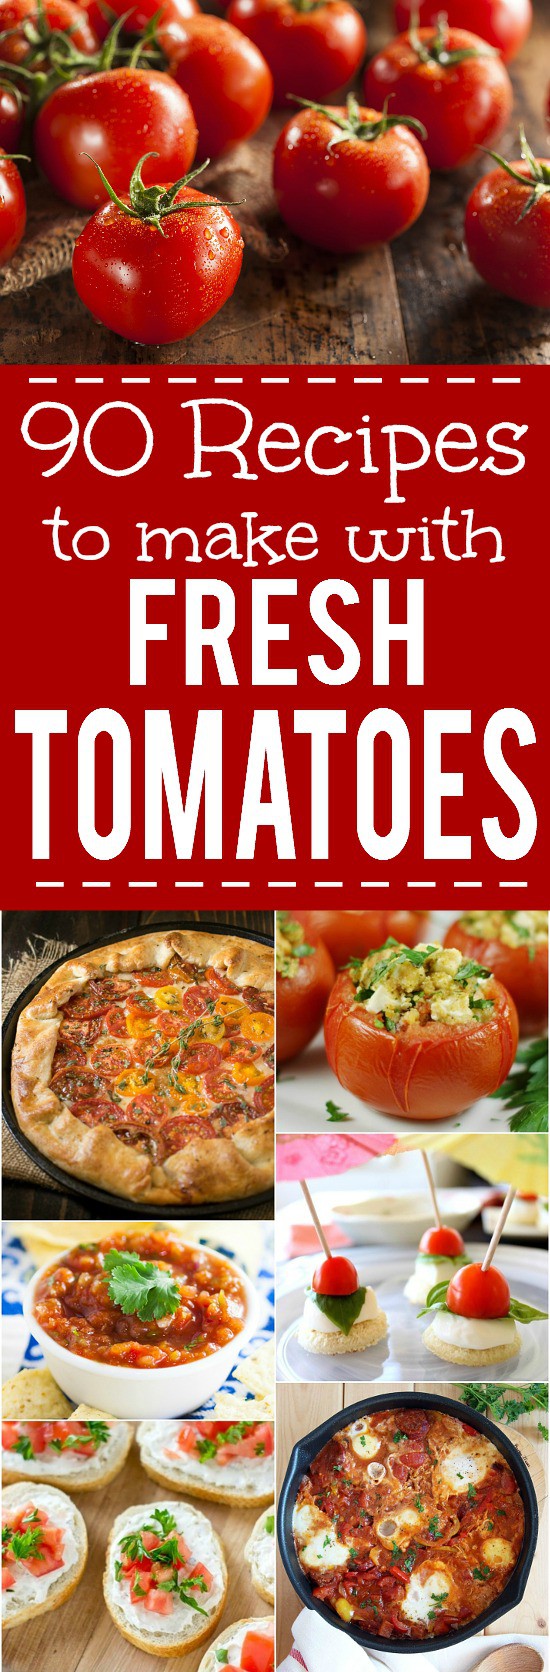 88 Recipes with Fresh Tomatoes - Use up your fresh, juicy tomato harvest this Summer with these 88 of the absolute BEST Recipes with Fresh Tomatoes that are sure to have you celebrating your garden, from cherry or grape tomatoes, to beefsteak or heirloom tomatoes!